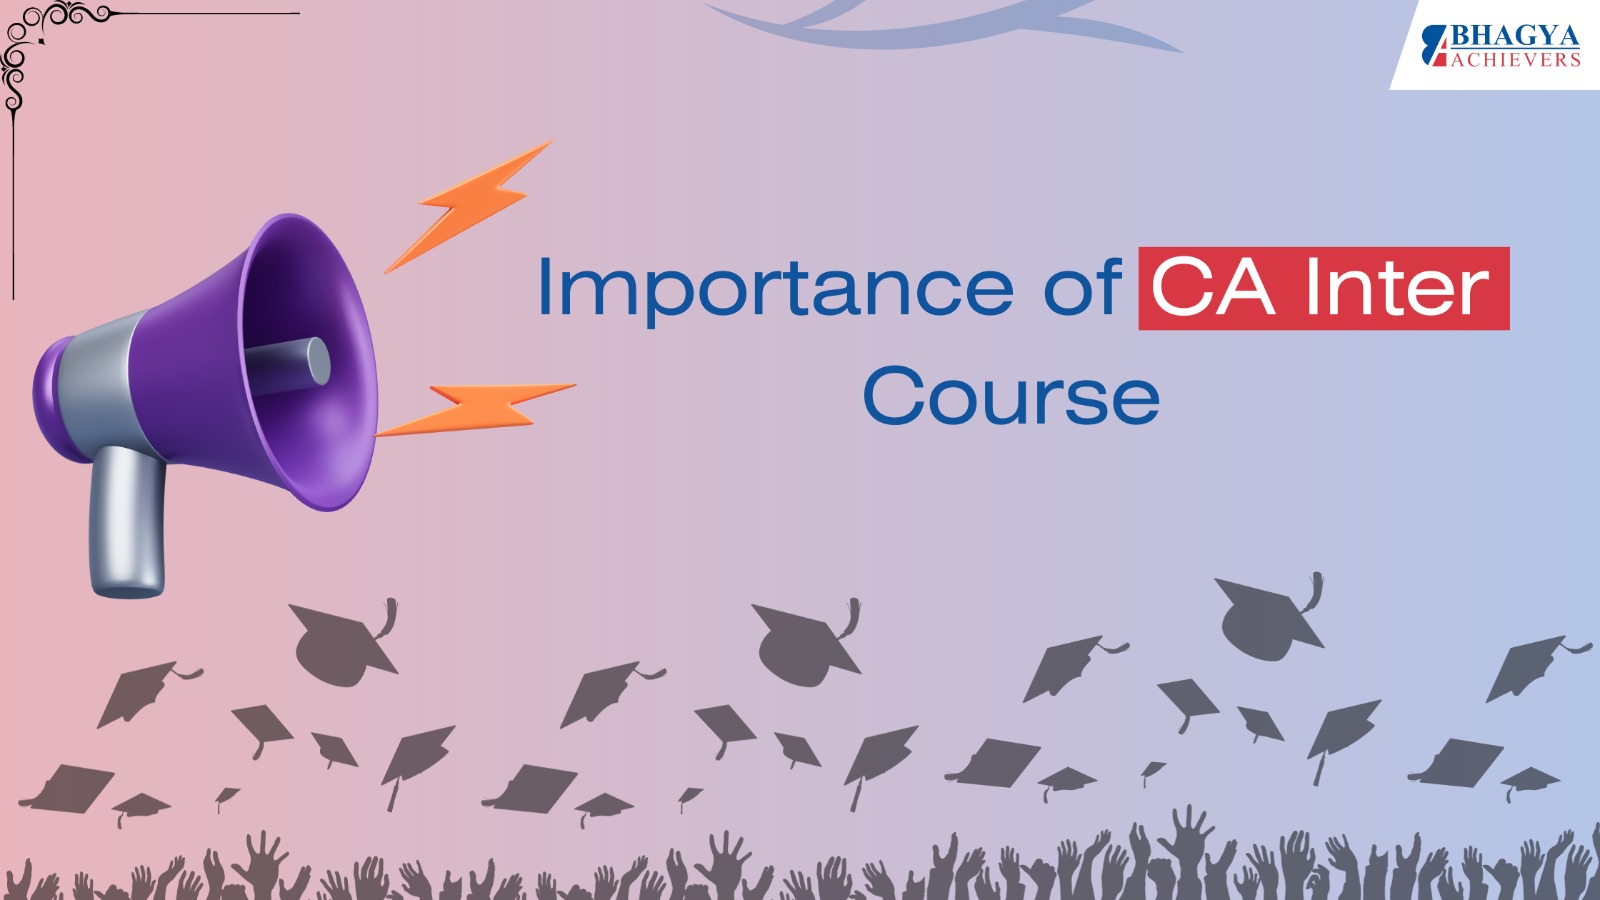 Importance of CA Inter Course - Bhagya Achievers